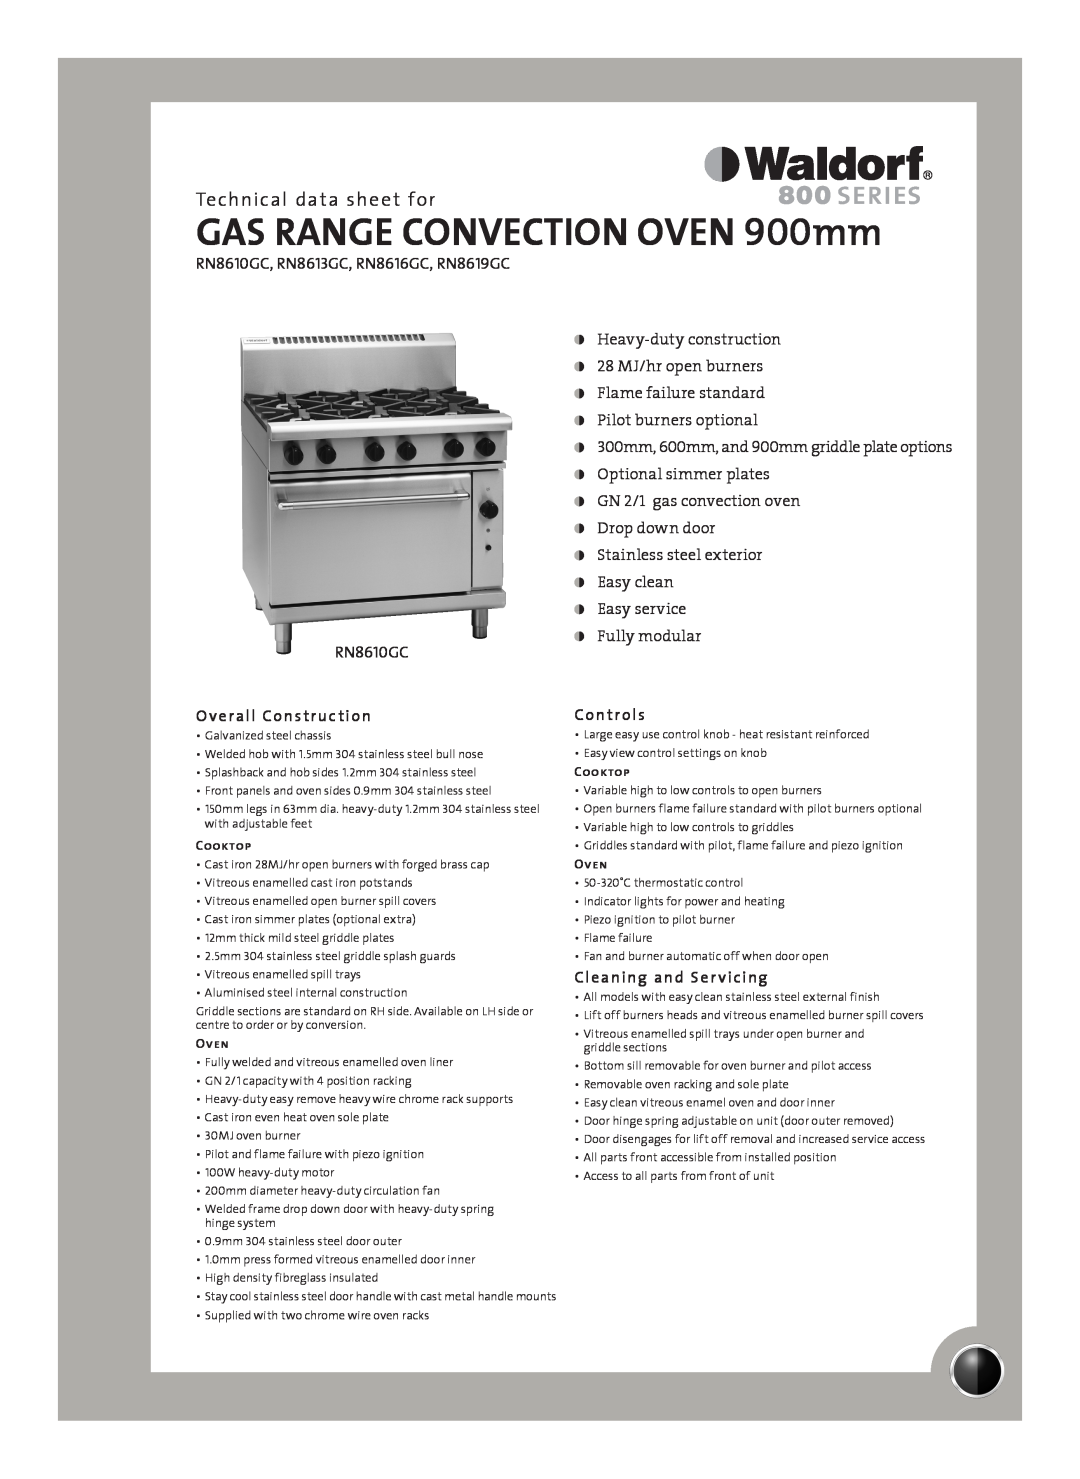 Moffat RN8616GC manual Technical data sheet for, Overall Construction, Controls, Cleaning and Ser vicing, Cooktop, Oven 